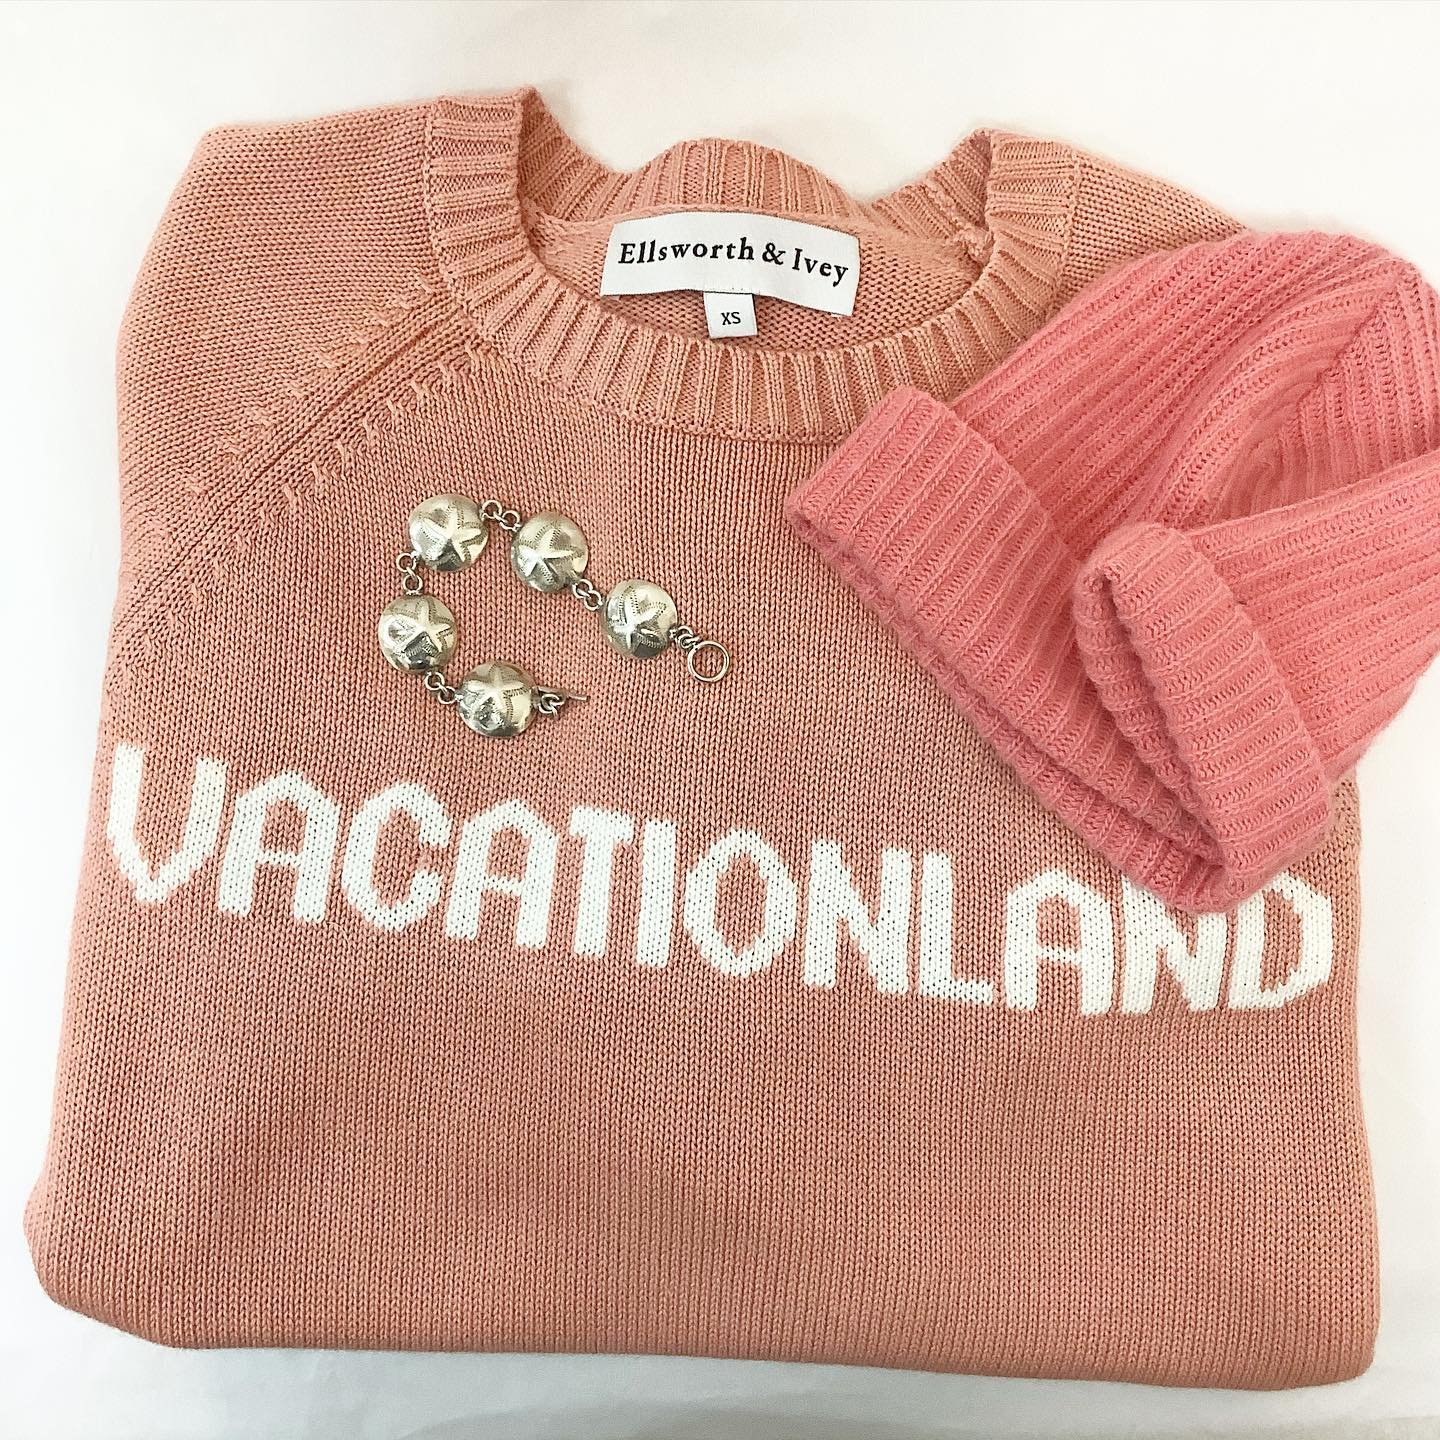 forget me nots vacationland sweater.jpg